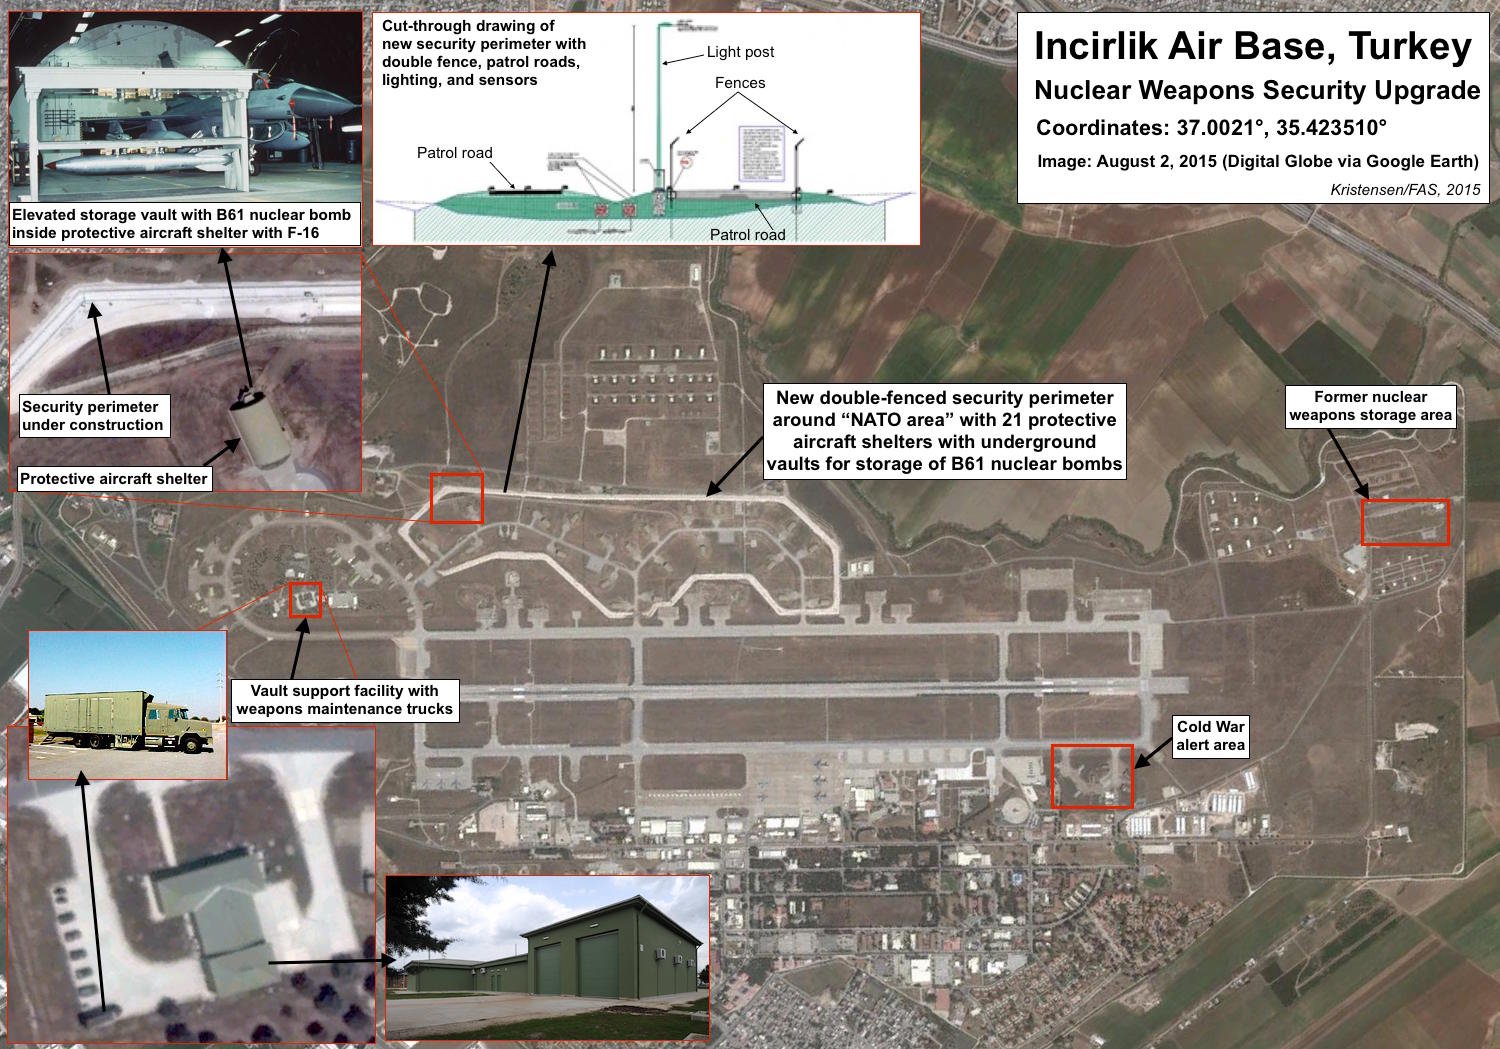 US Considering Ways To Remove B61 Nuclear Bombs From Incirlik Air Base, Turkey: US Media